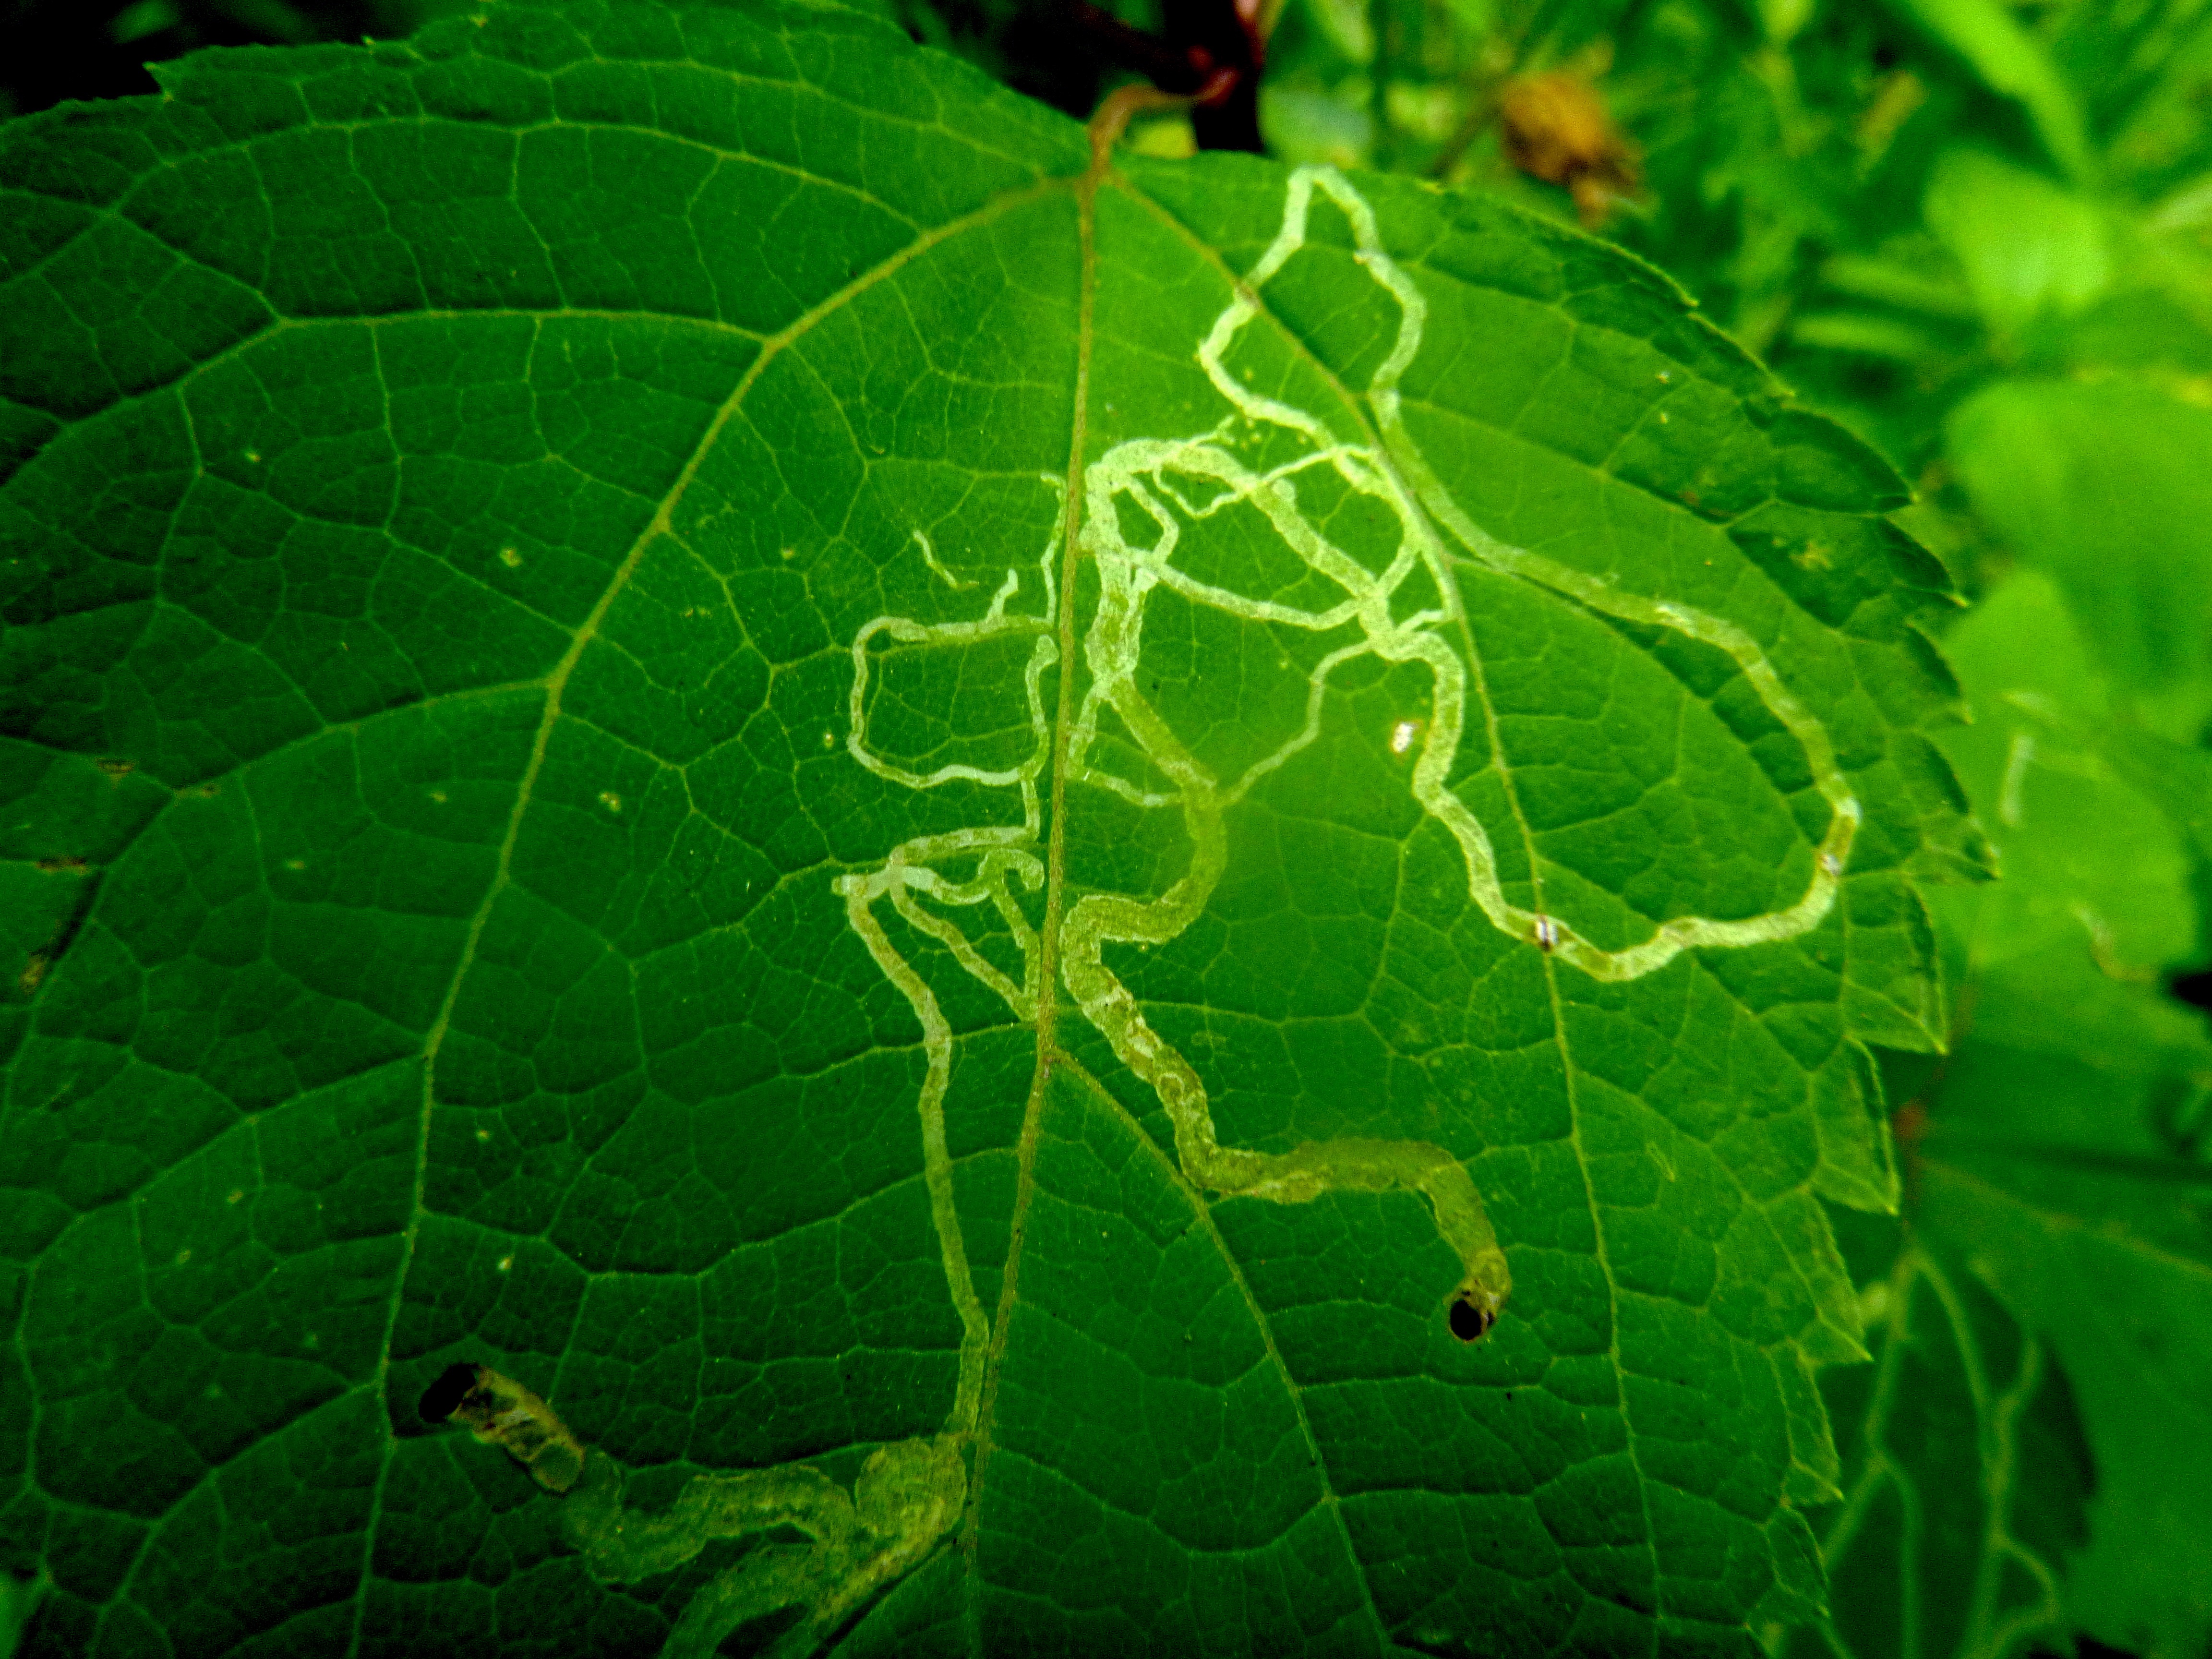 Photograph of green leaf with caterpillar trails